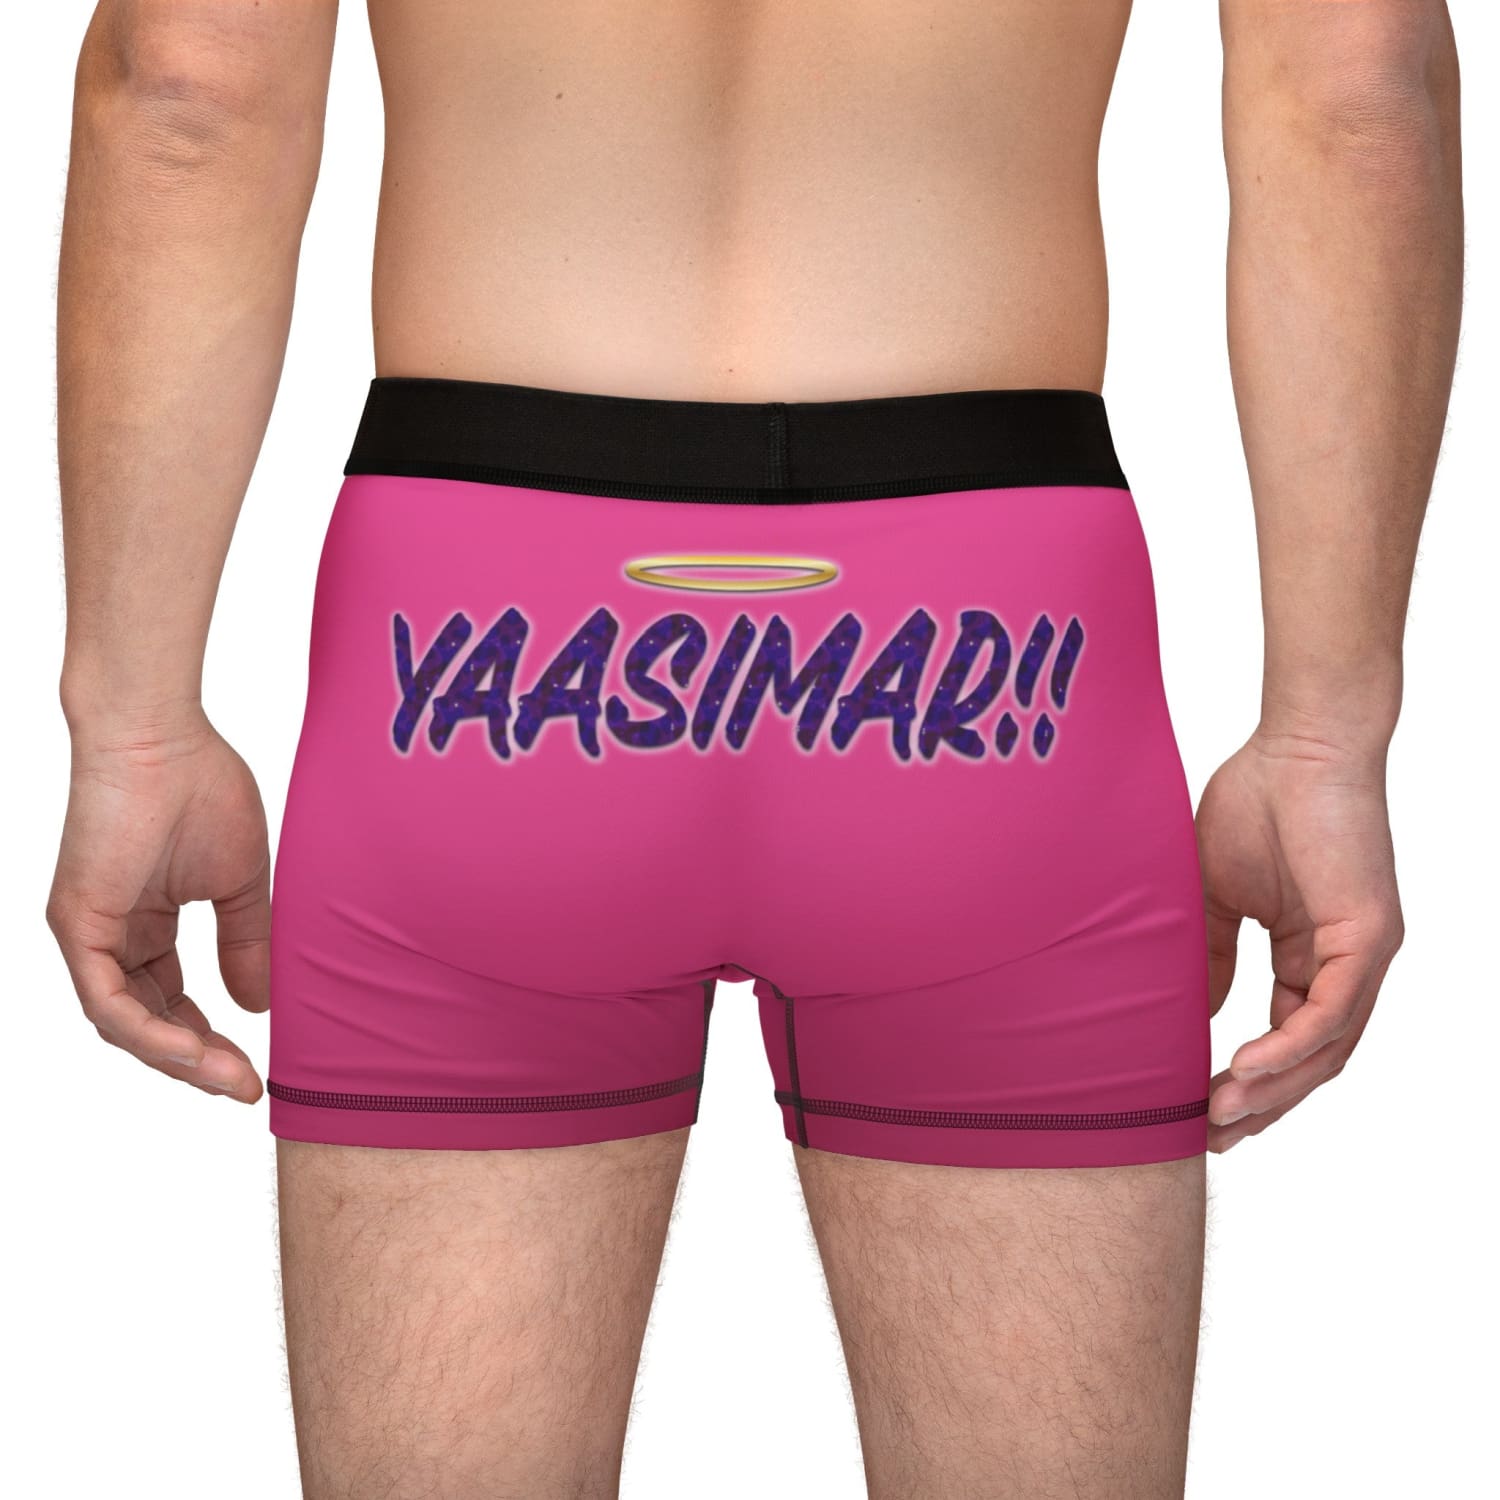 Yaasimar!! Mens Boxer Briefs - S / Black stitching - All Over Prints